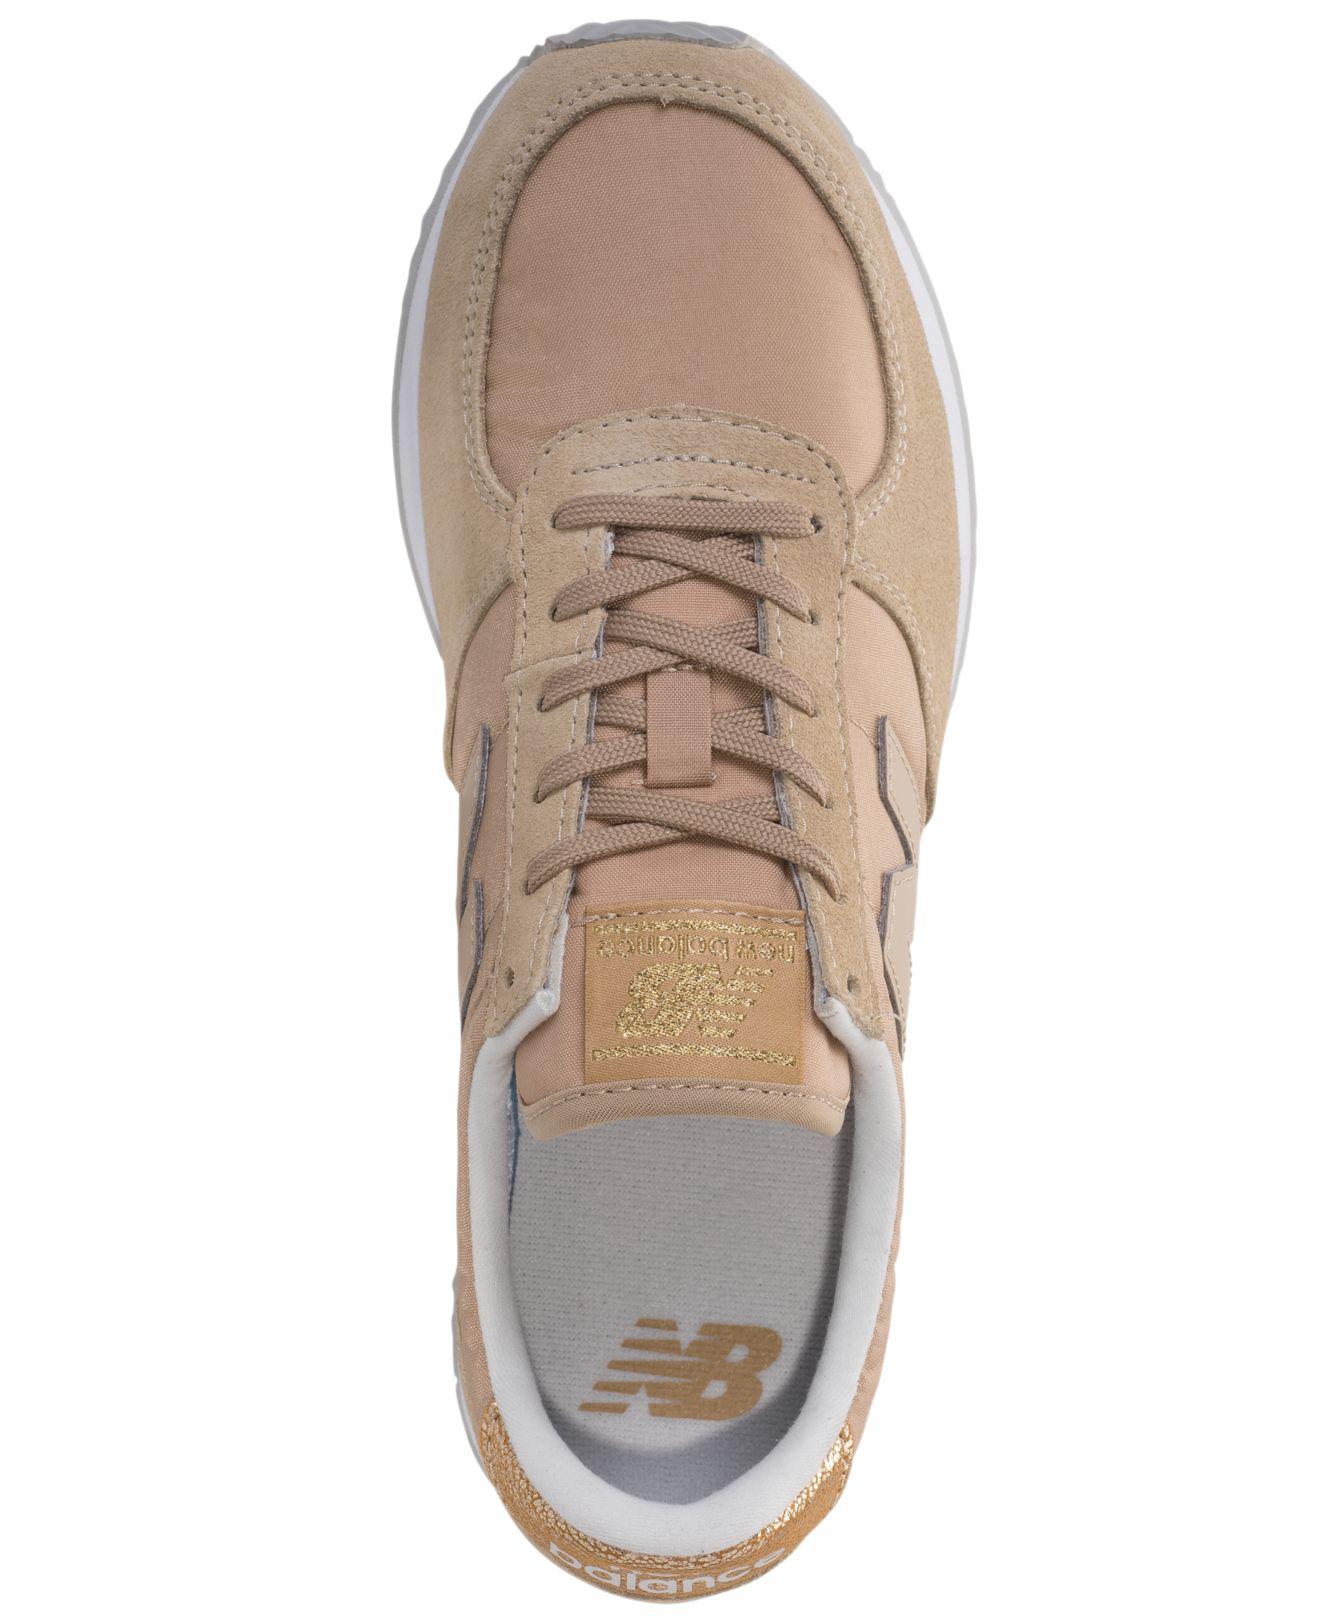 women's 220 casual sneakers from finish line